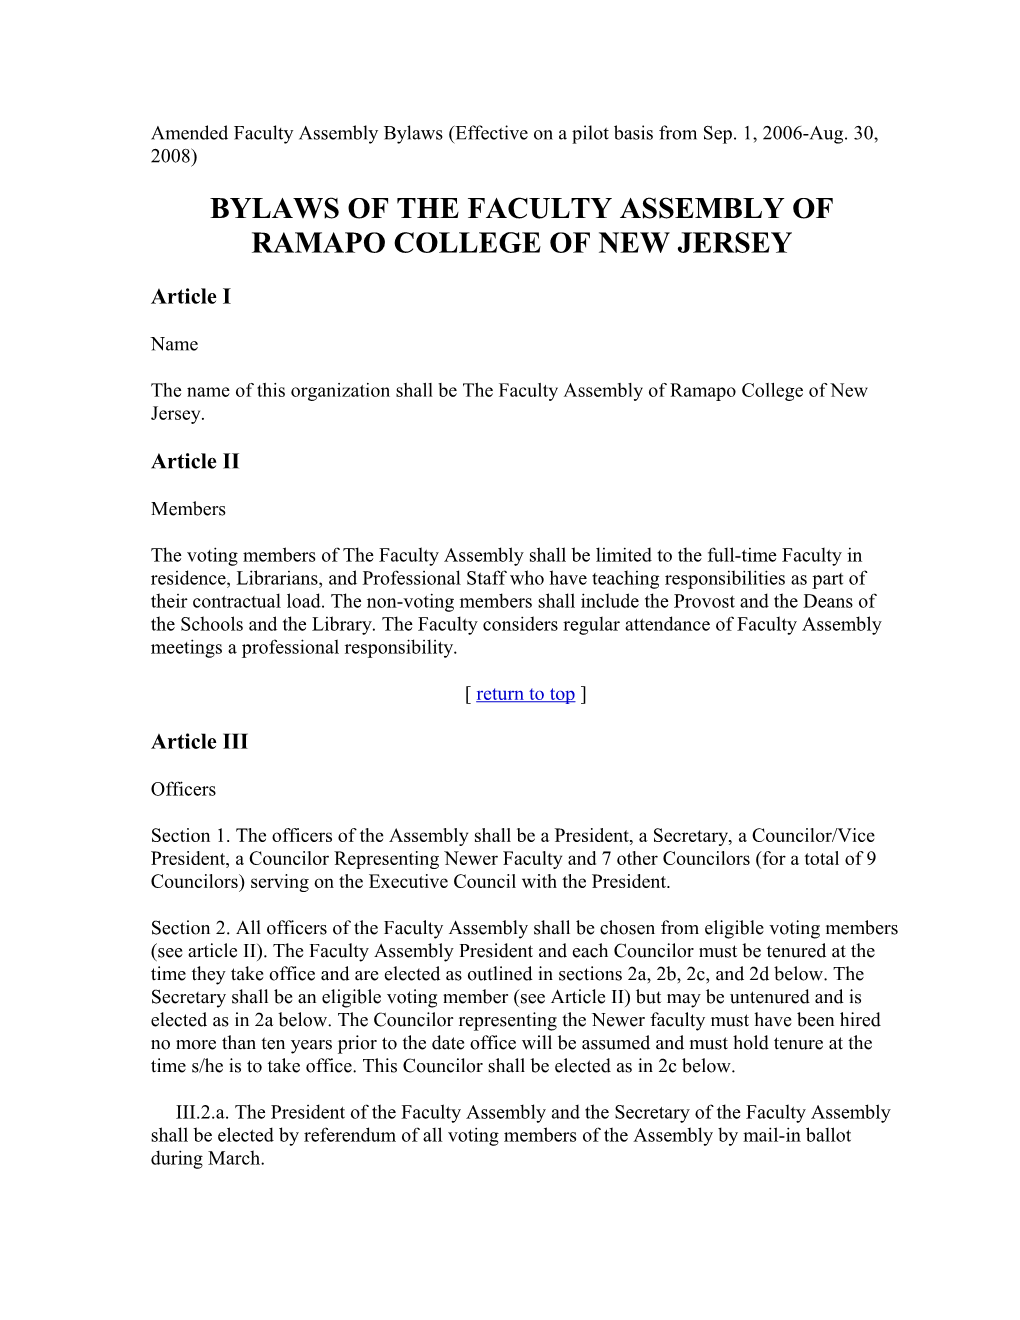 Amended Faculty Assembly Bylaws (Effective on a Pilot Basis from Sep